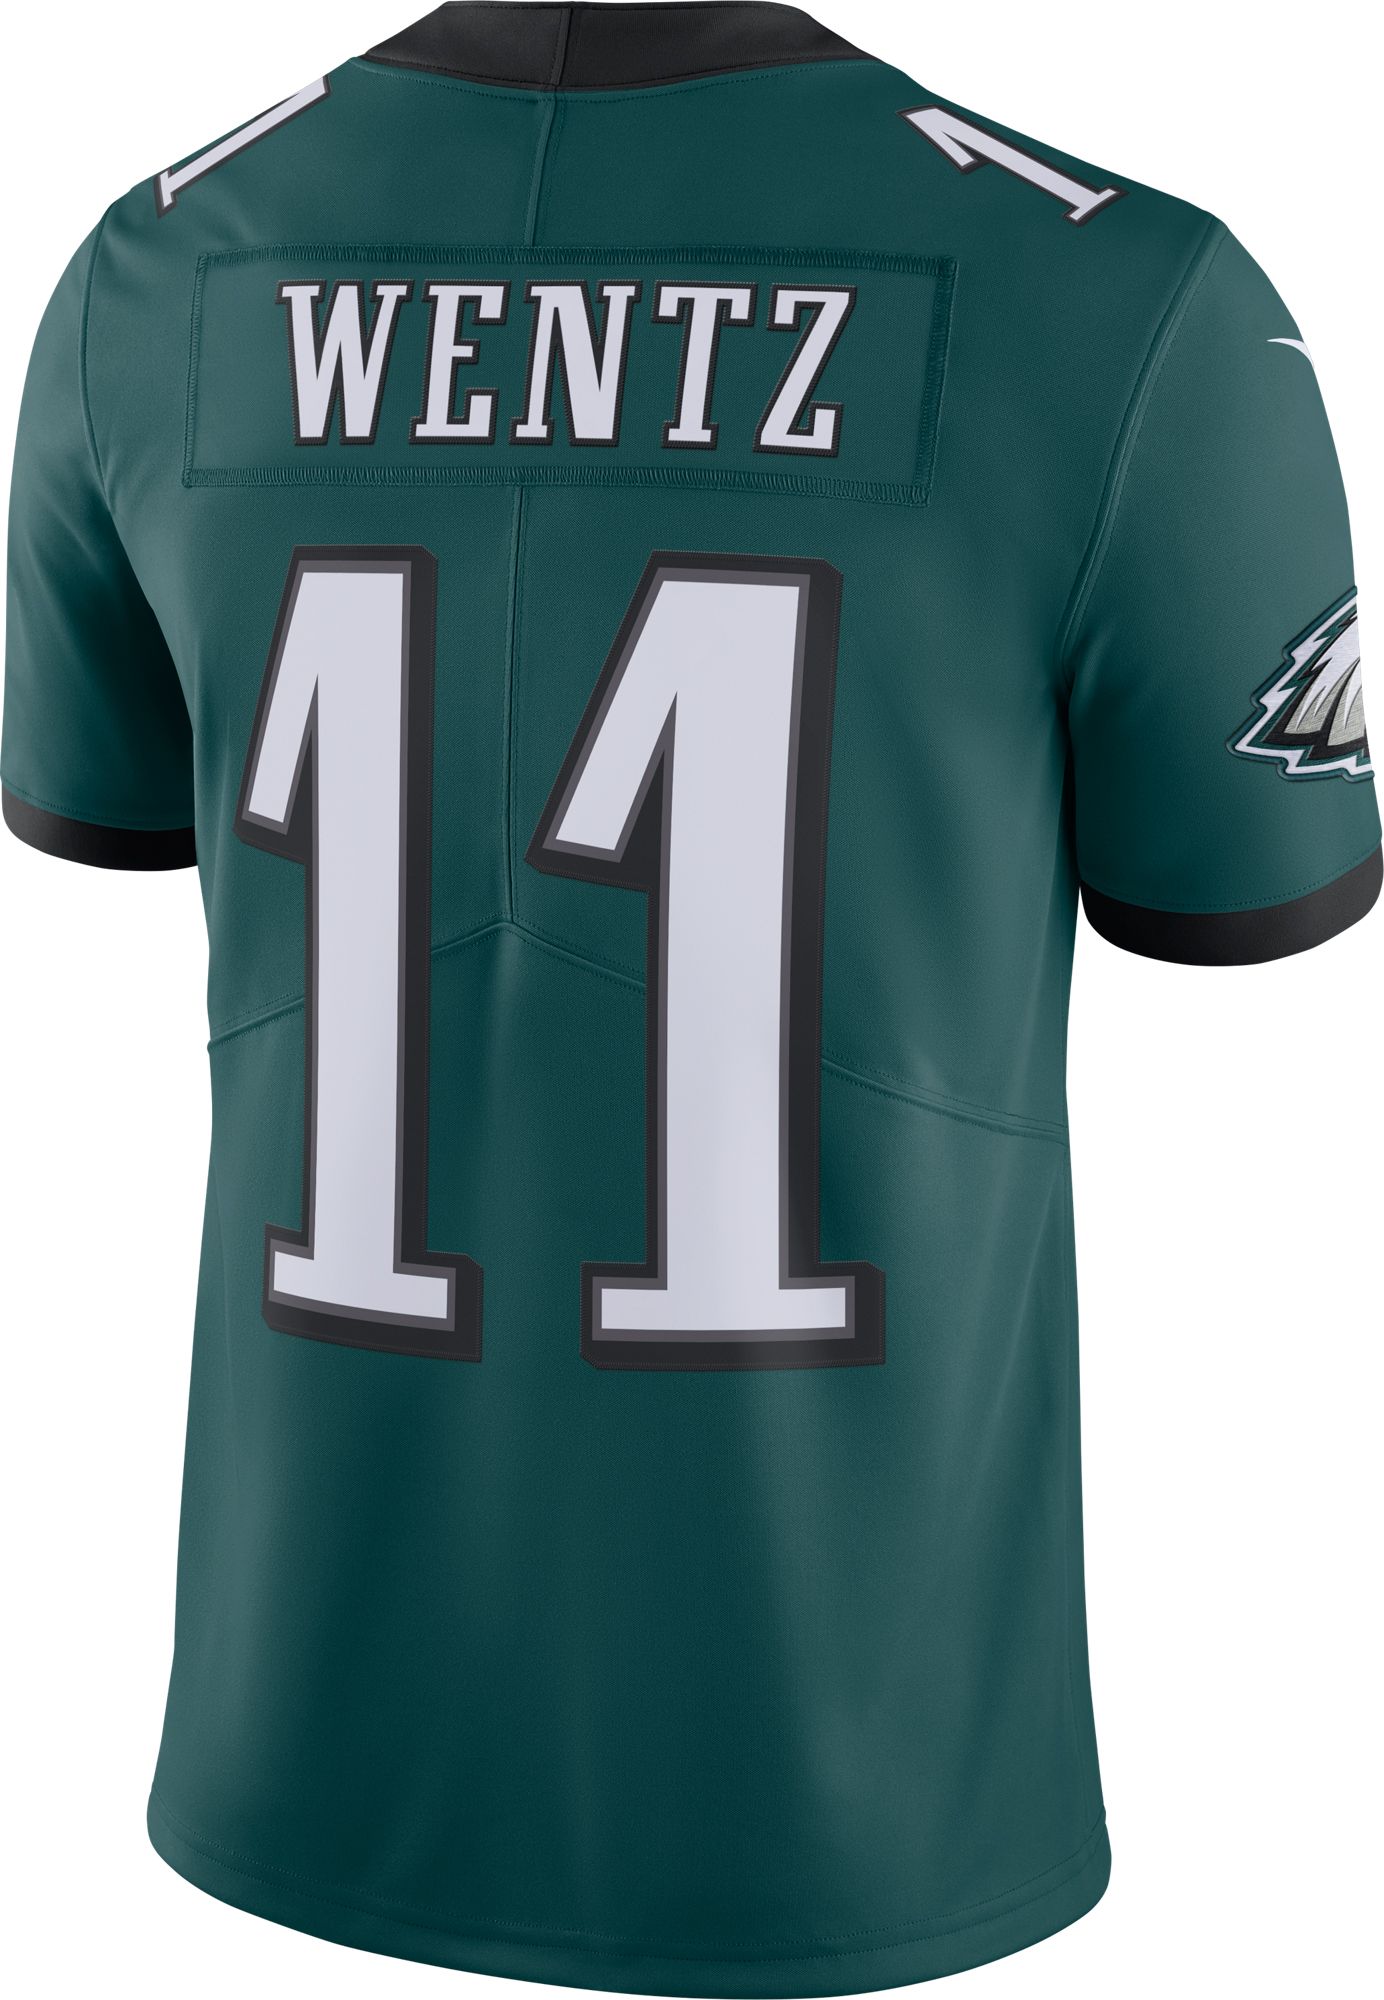 eagles limited jersey